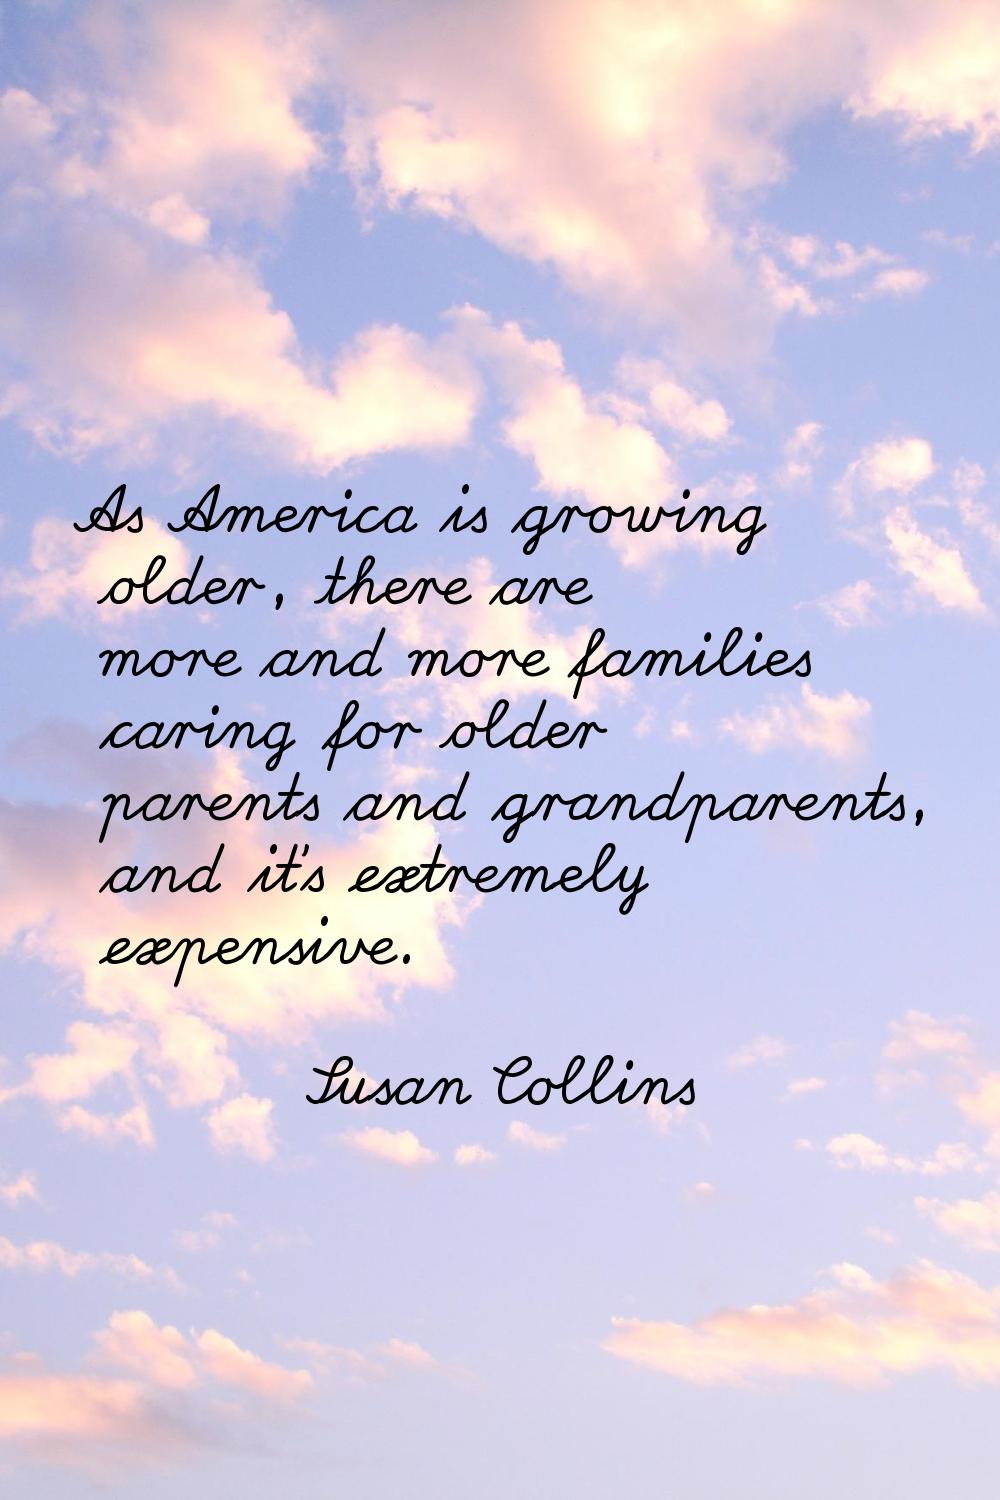 As America is growing older, there are more and more families caring for older parents and grandpar